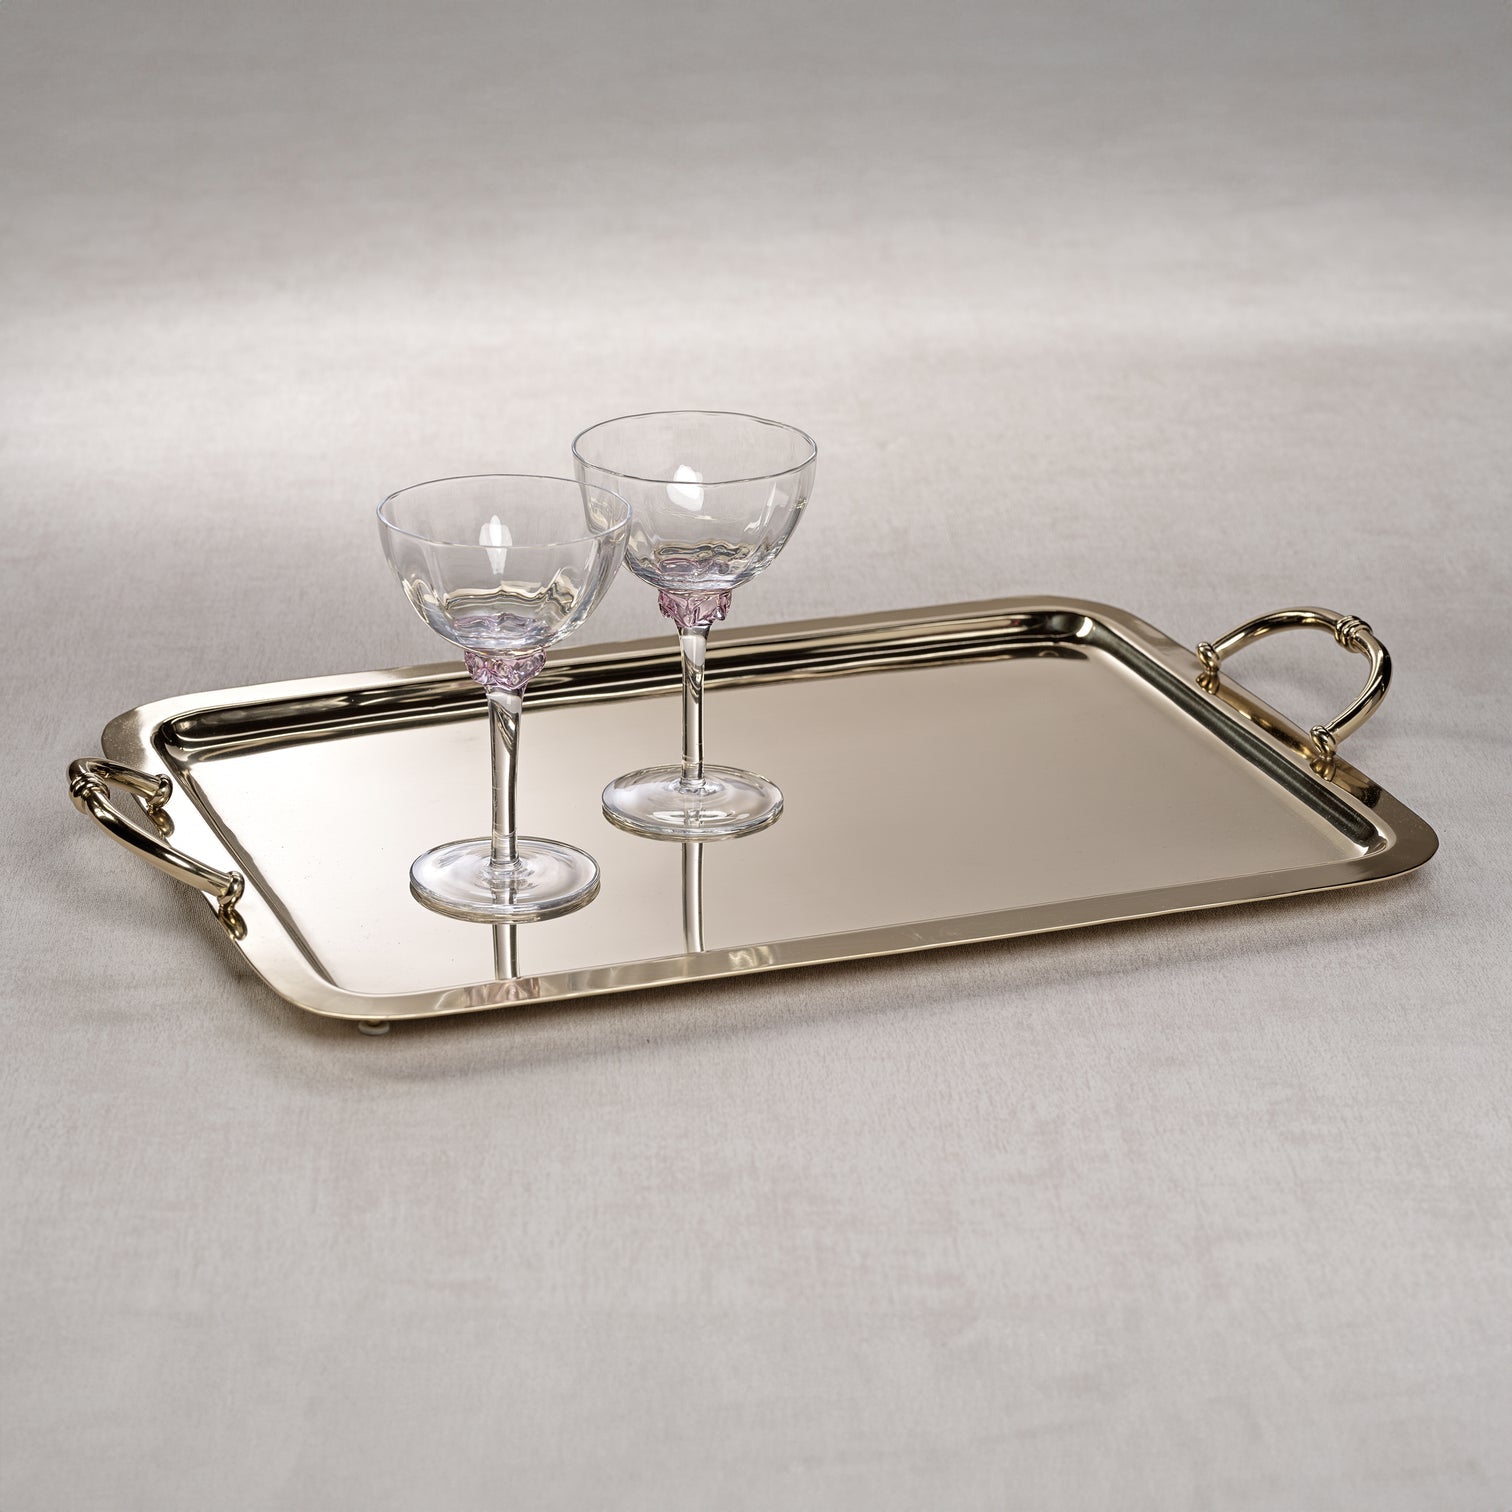 Manetta Steel & Brass Tray - Polished Gold - 5 sizes